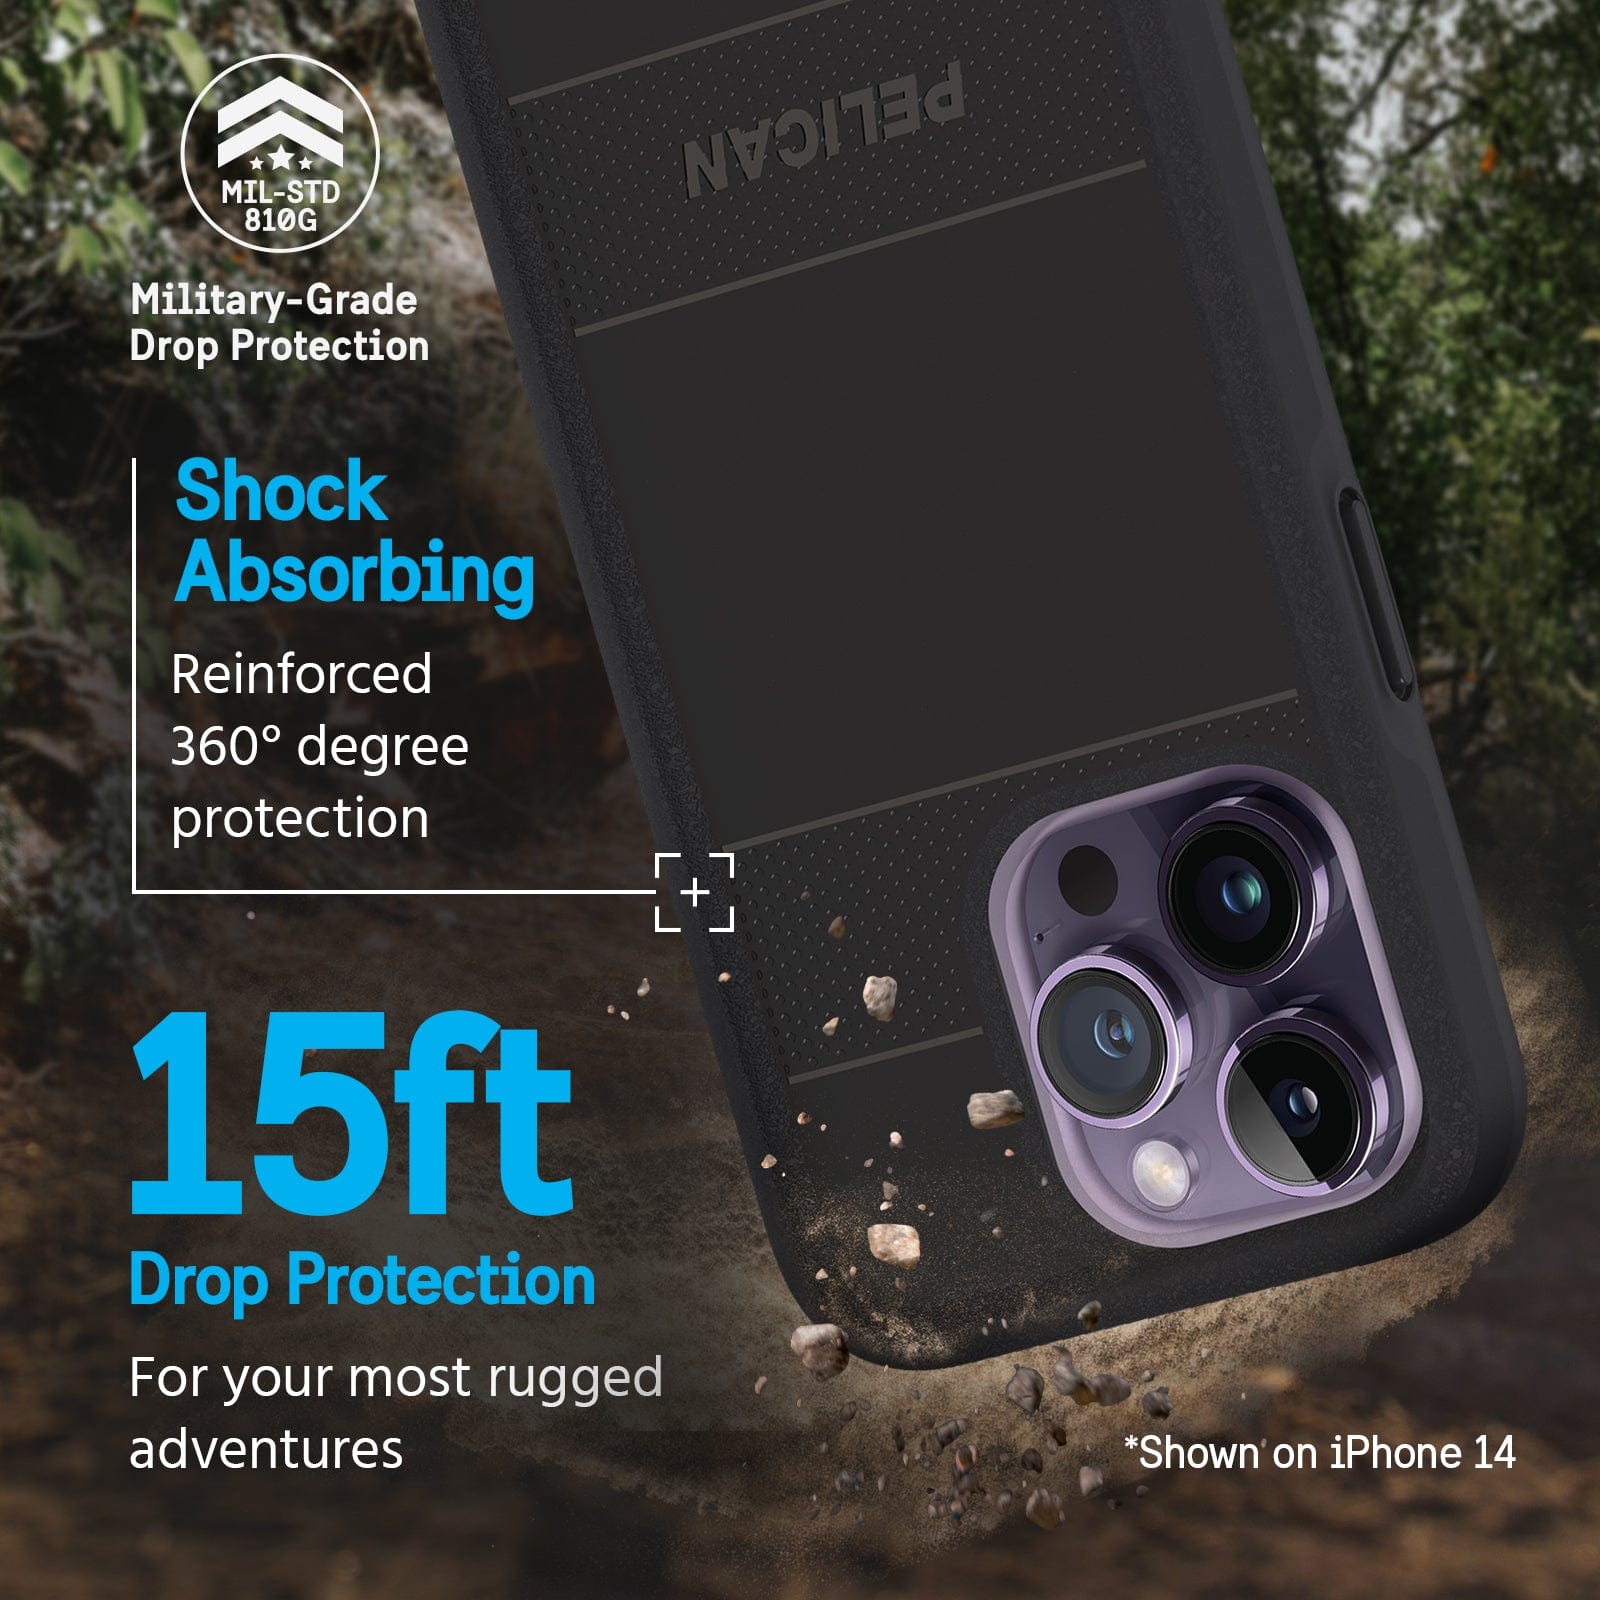 15ft DROP PROTECTION FOR YOUR MOST RUGGED ADVENTURES. SHOCK ABSORBING REINFORCED 360 DEGREE PROTECTION.